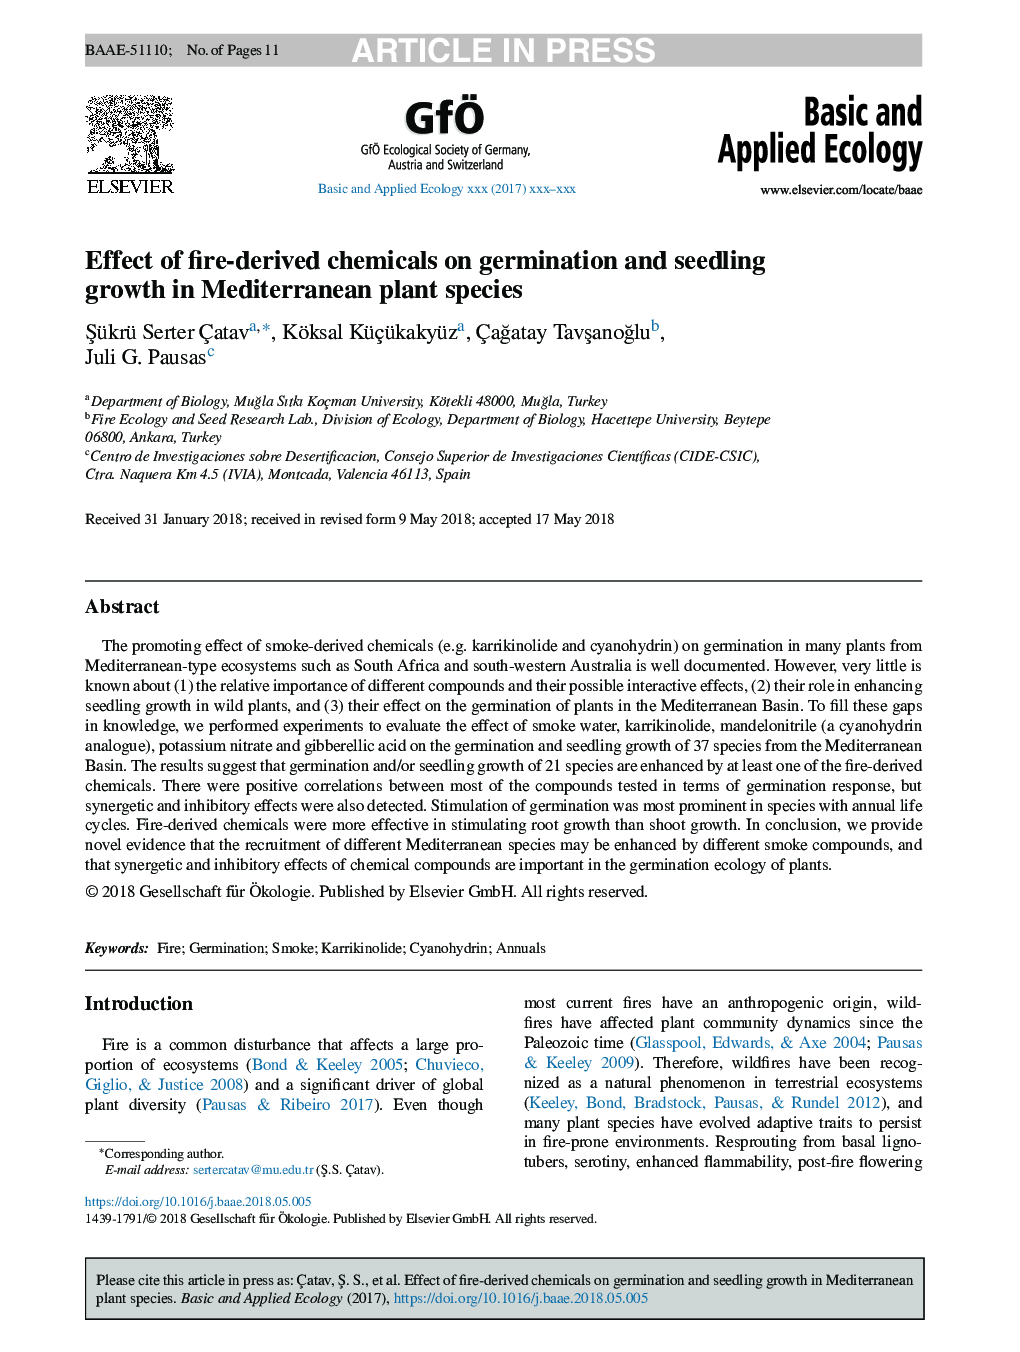 Effect of fire-derived chemicals on germination and seedling growth in Mediterranean plant species